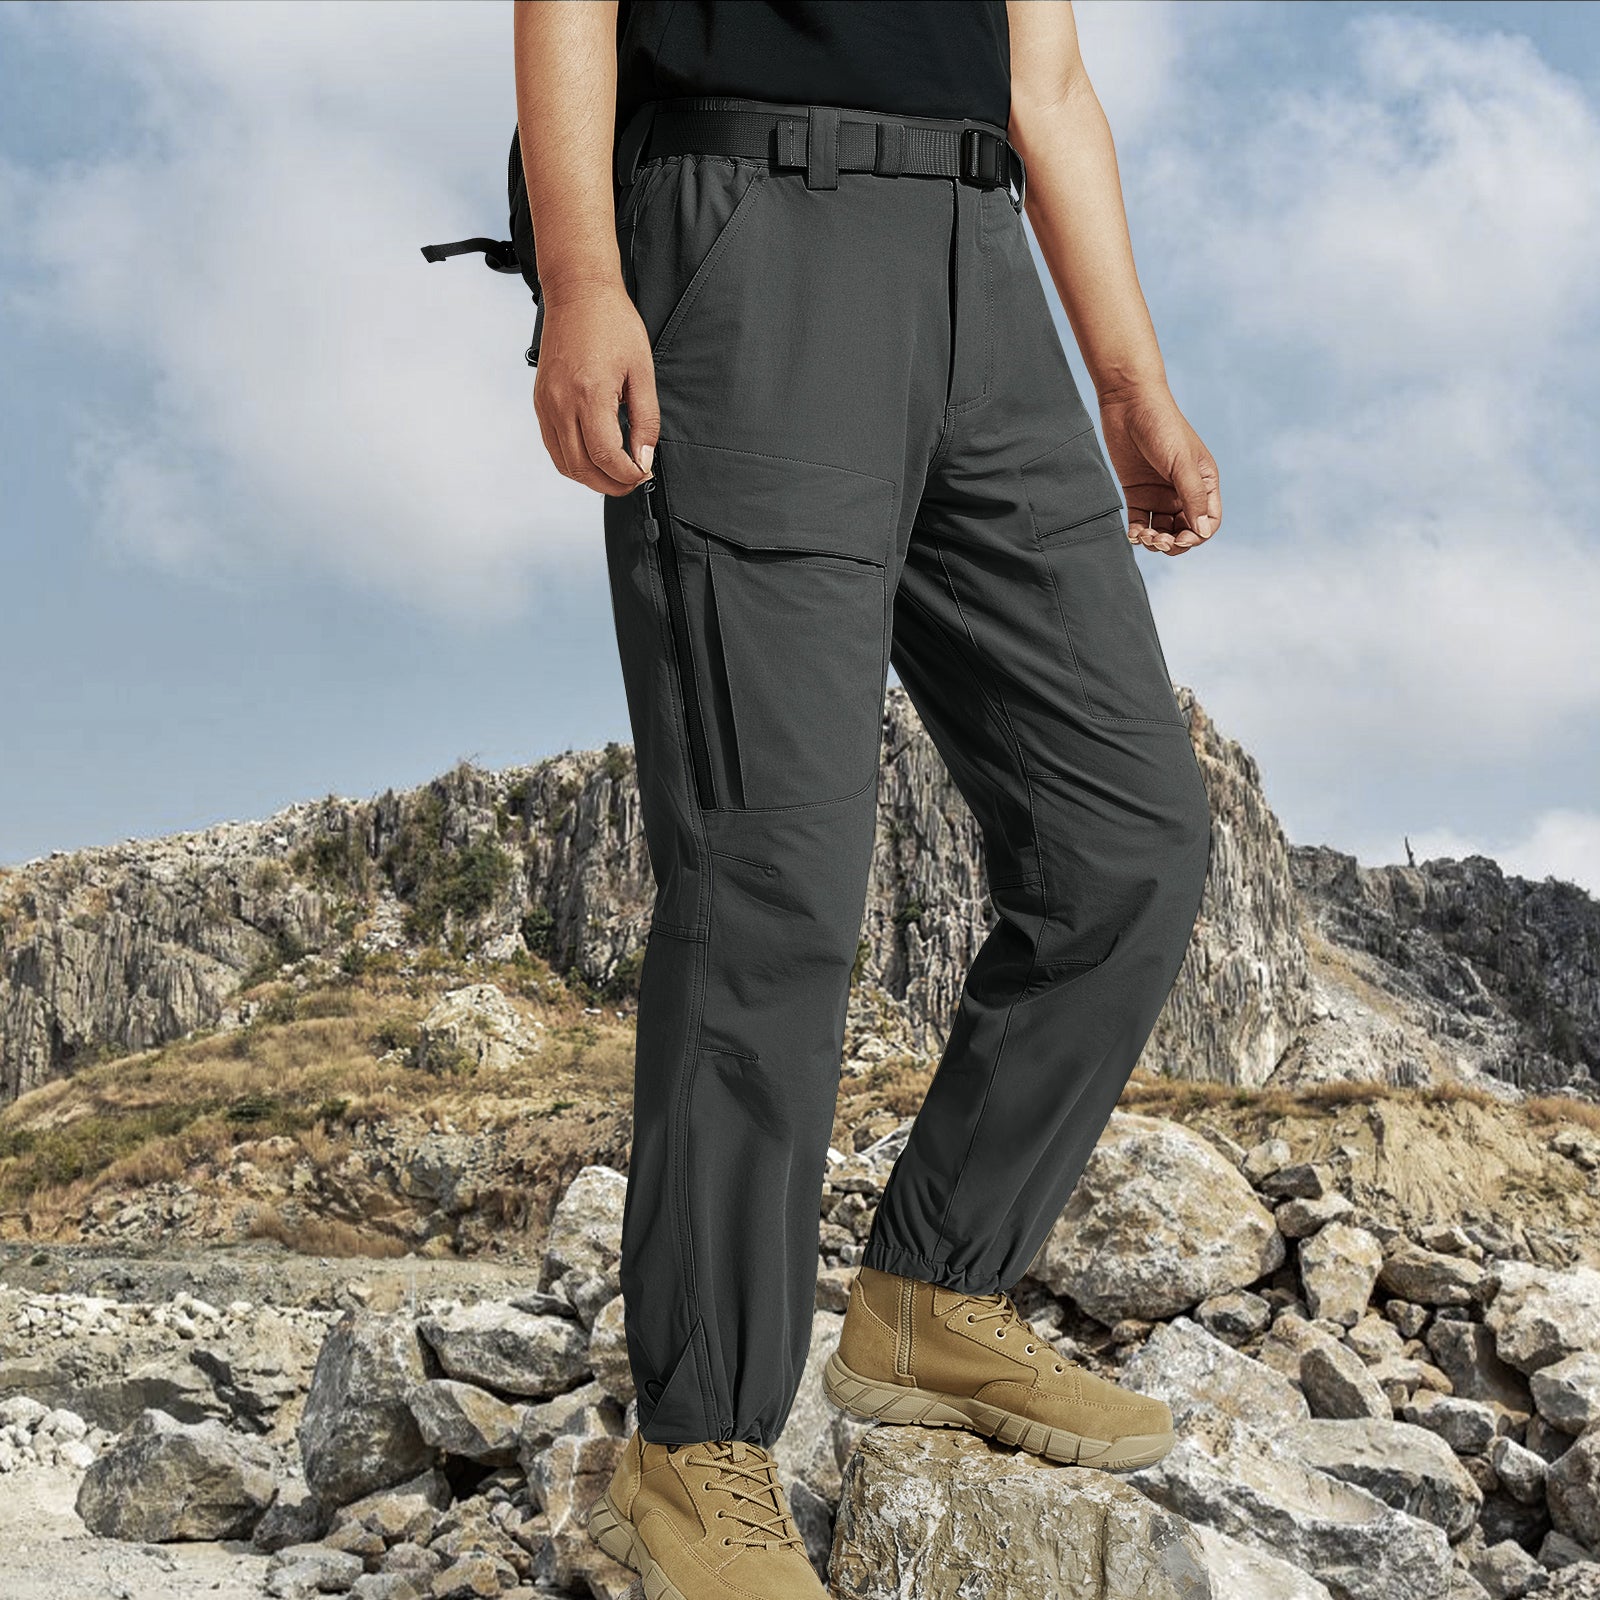 FARUNGS Quick Dry Cargo Pants Lightweight Tactical Hiking Pants